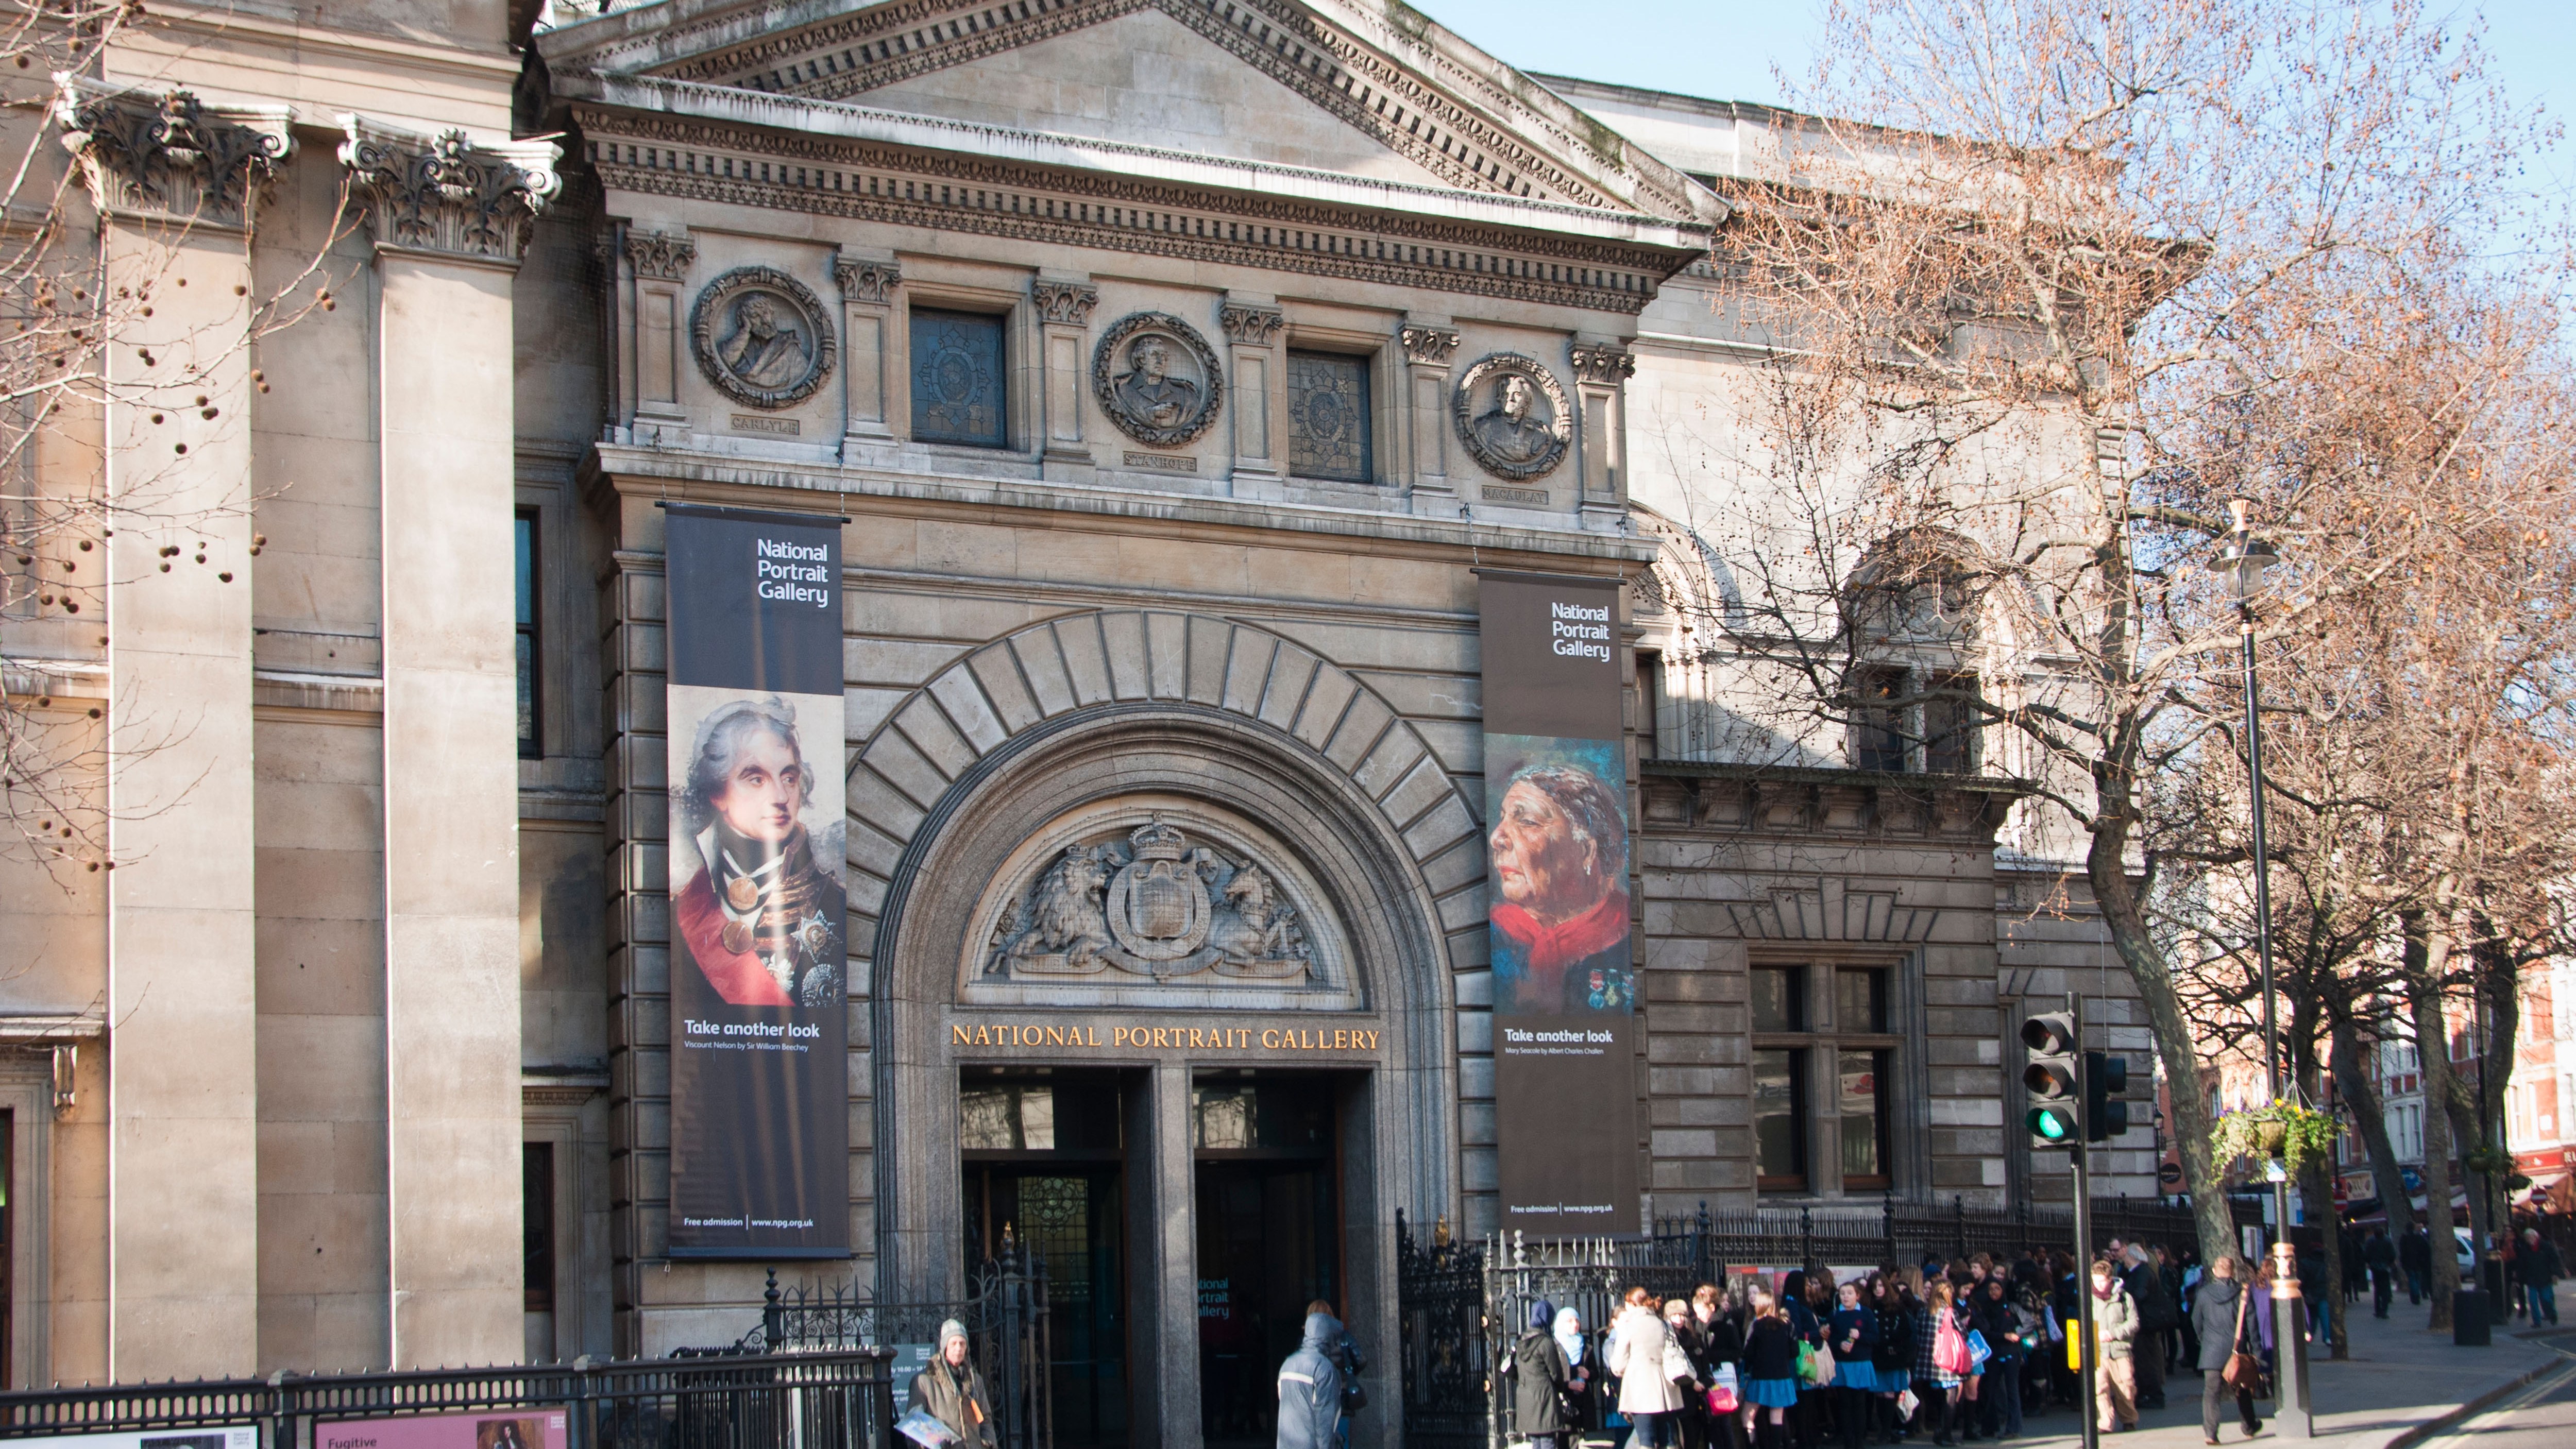 The National Portrait Gallery in London claimed Edward Fox White had benefited from compensation given out after the abolition of slavery